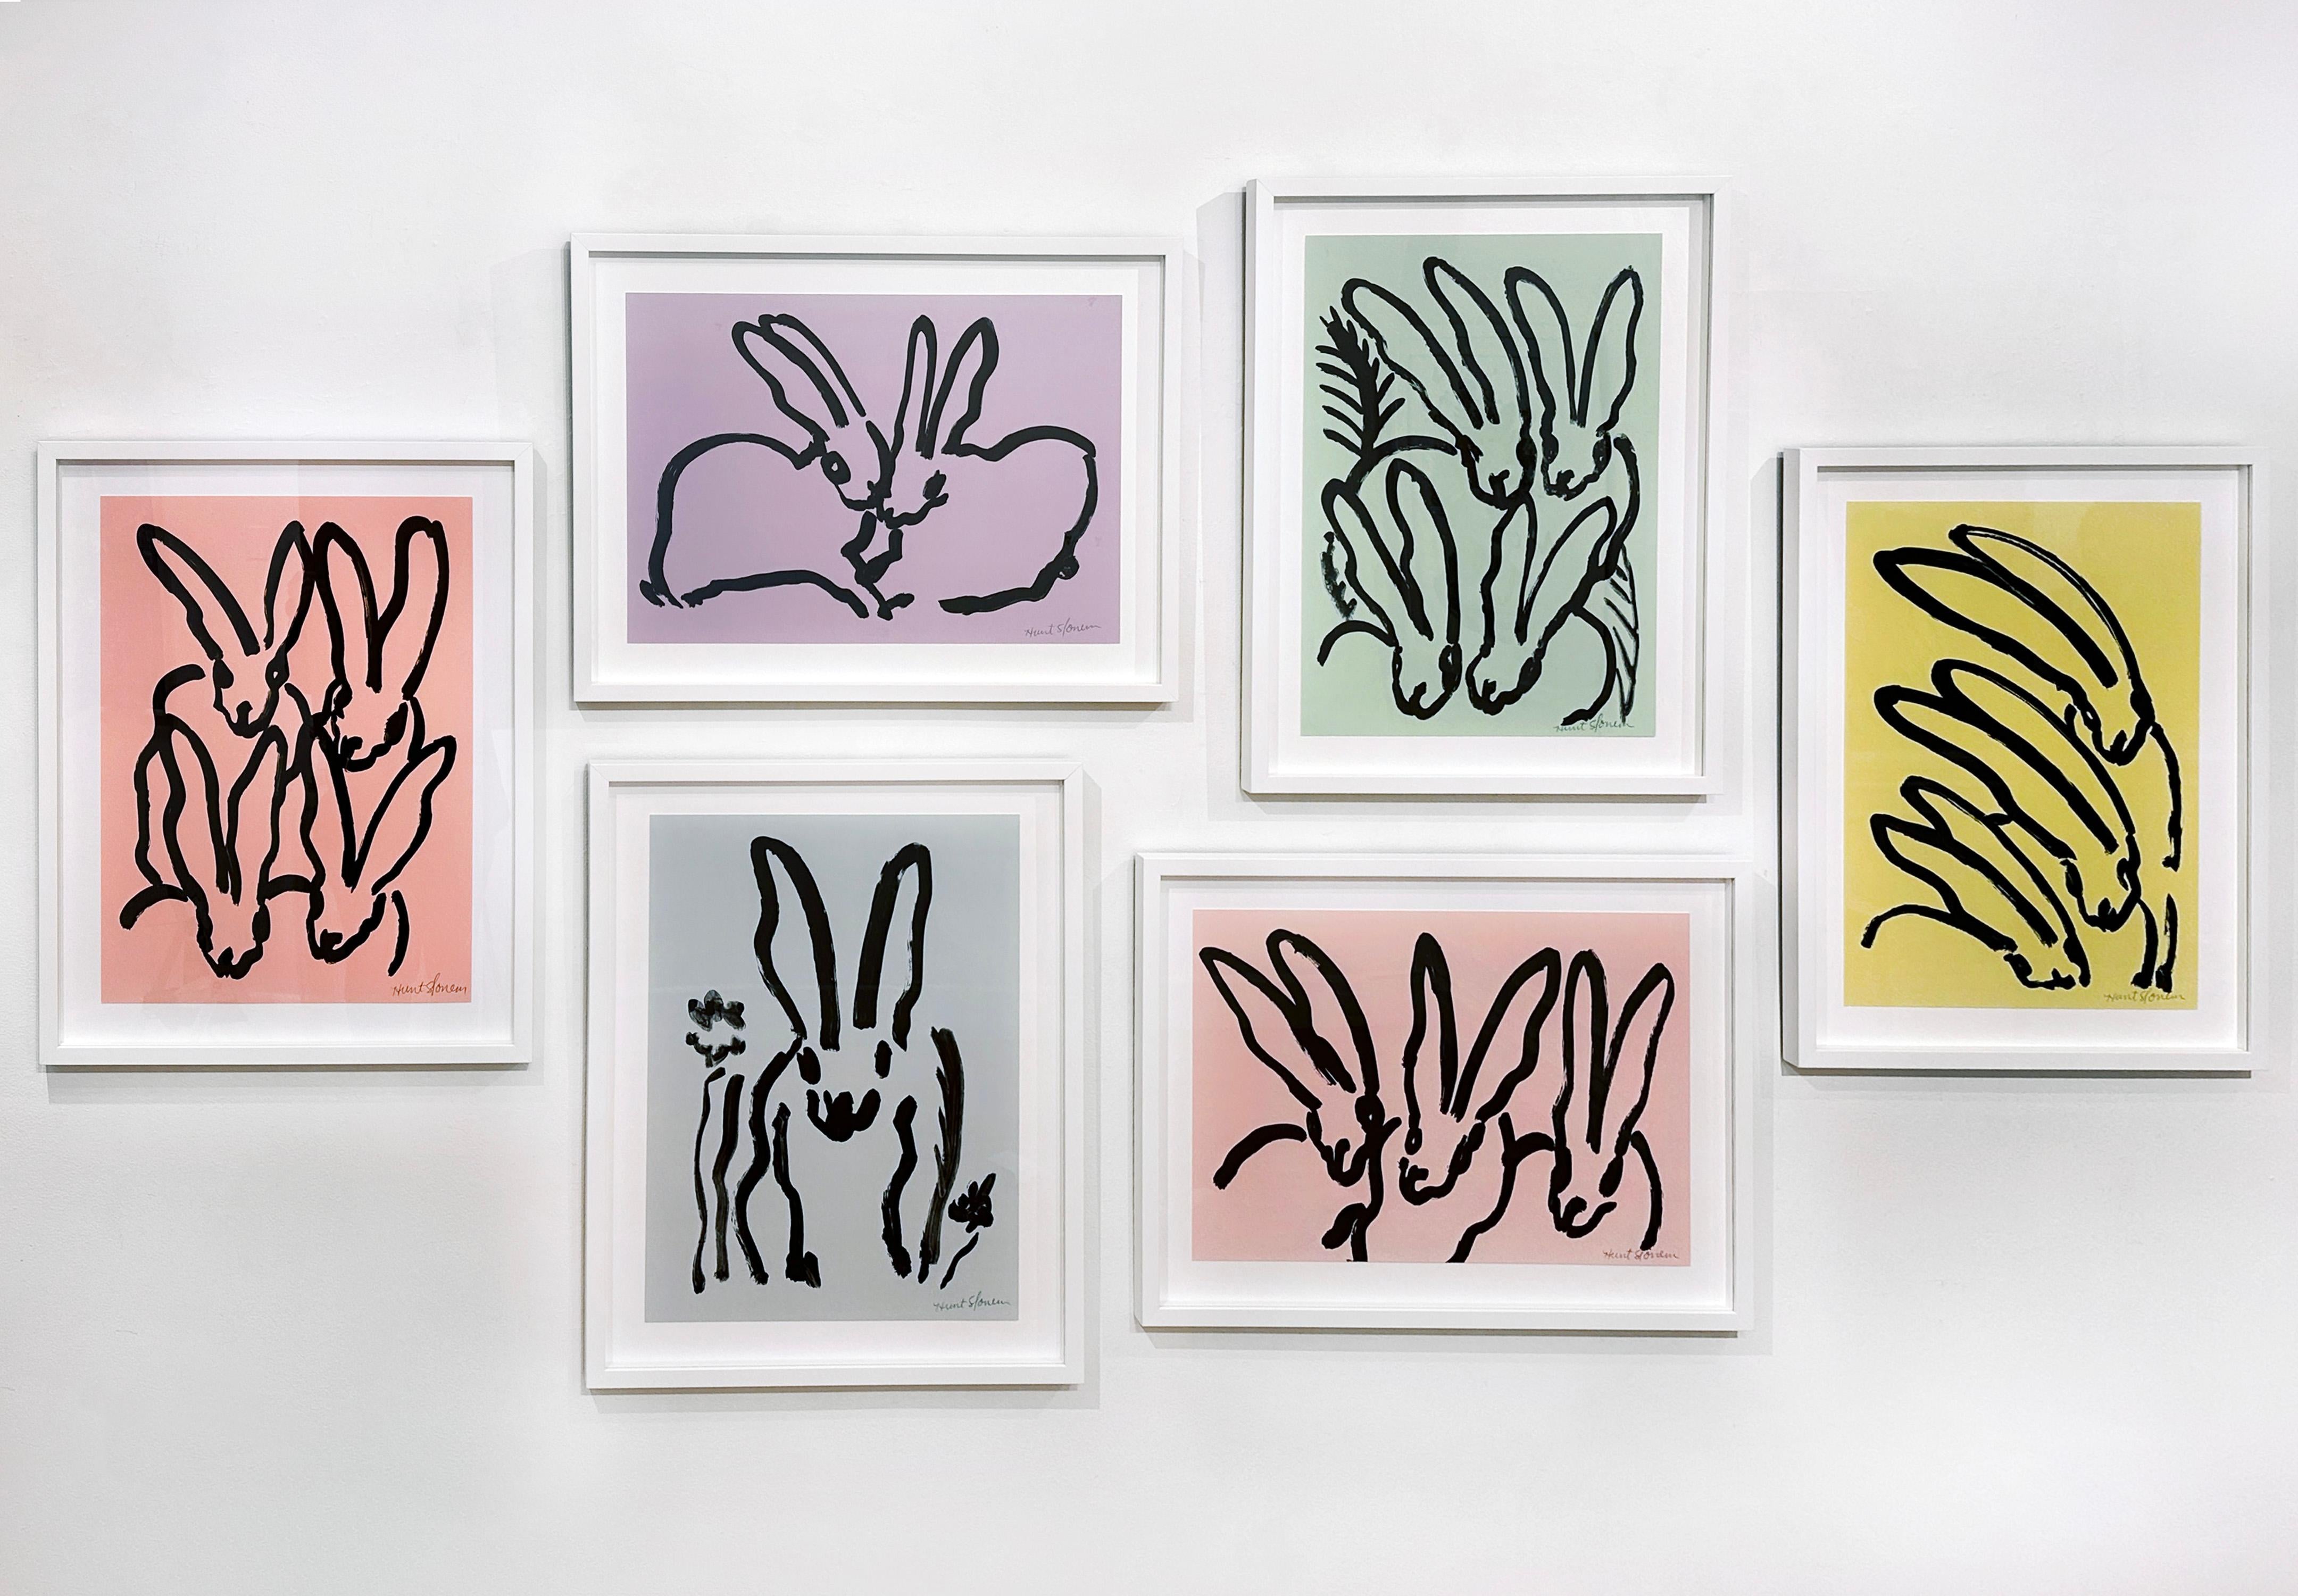 Pale Pink Bunnies - Contemporary Print by Hunt Slonem